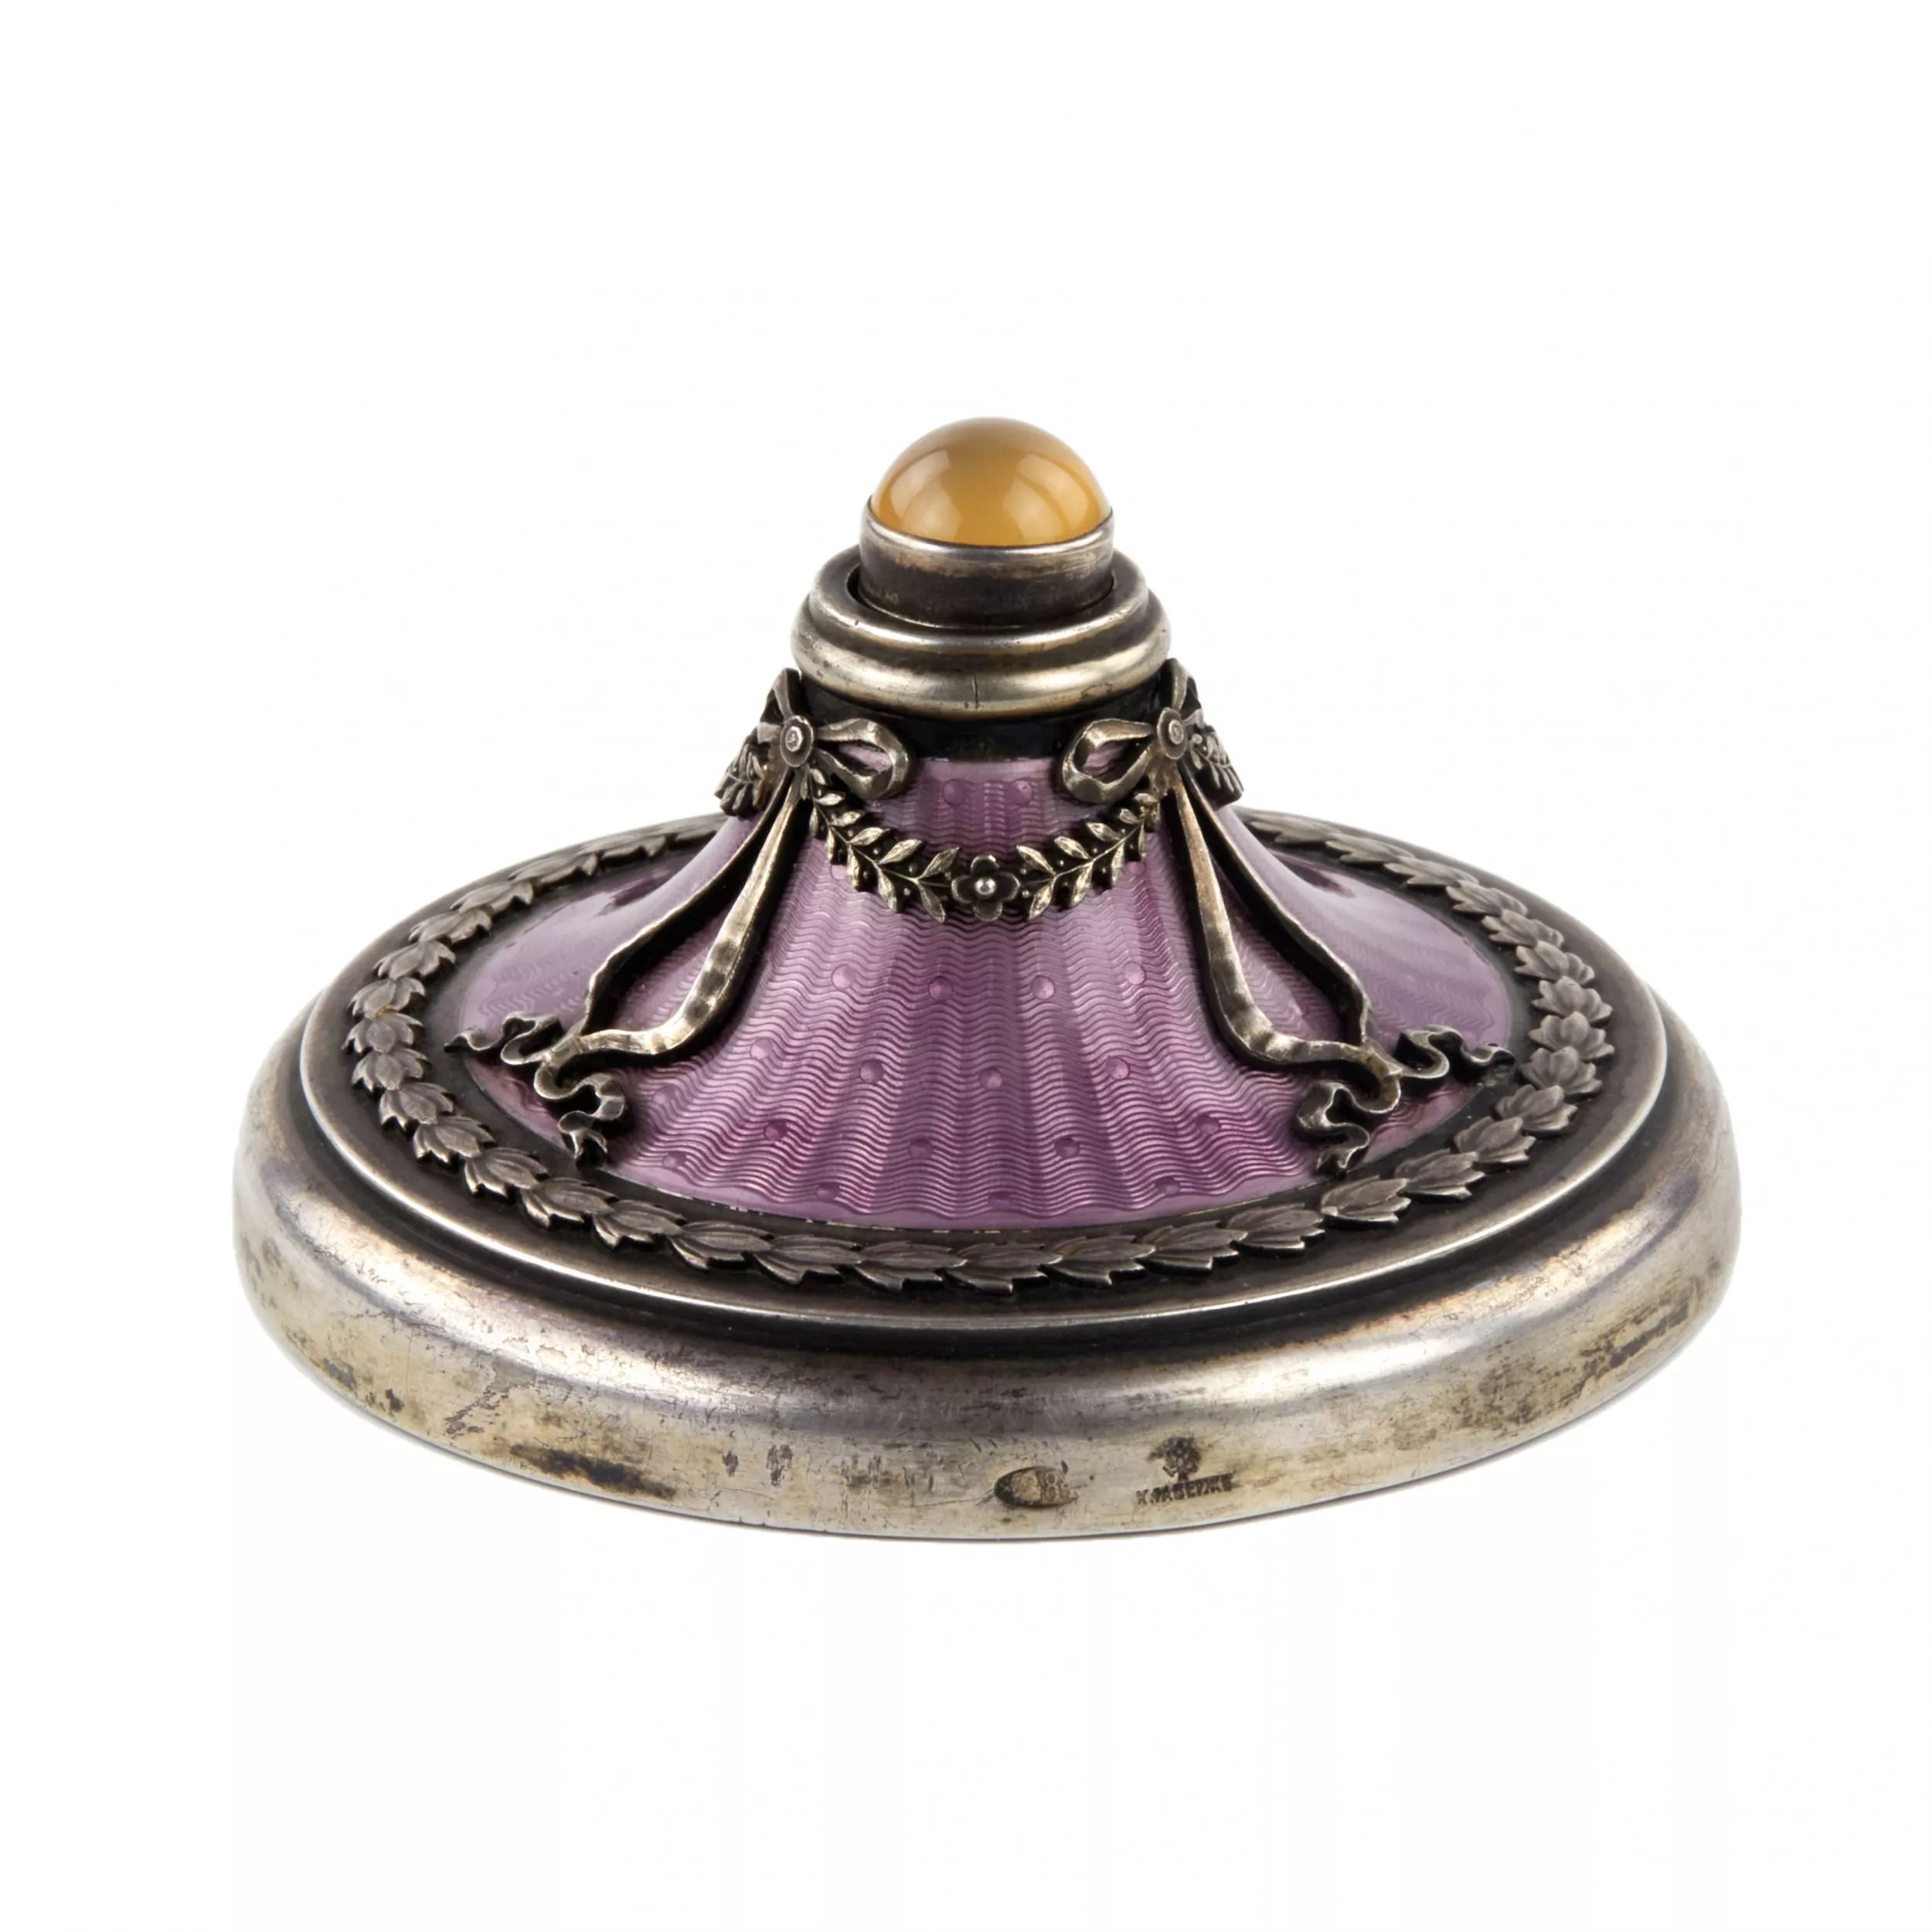 K-Faberge-Silver-table-bell-with-guilloché-enamel-